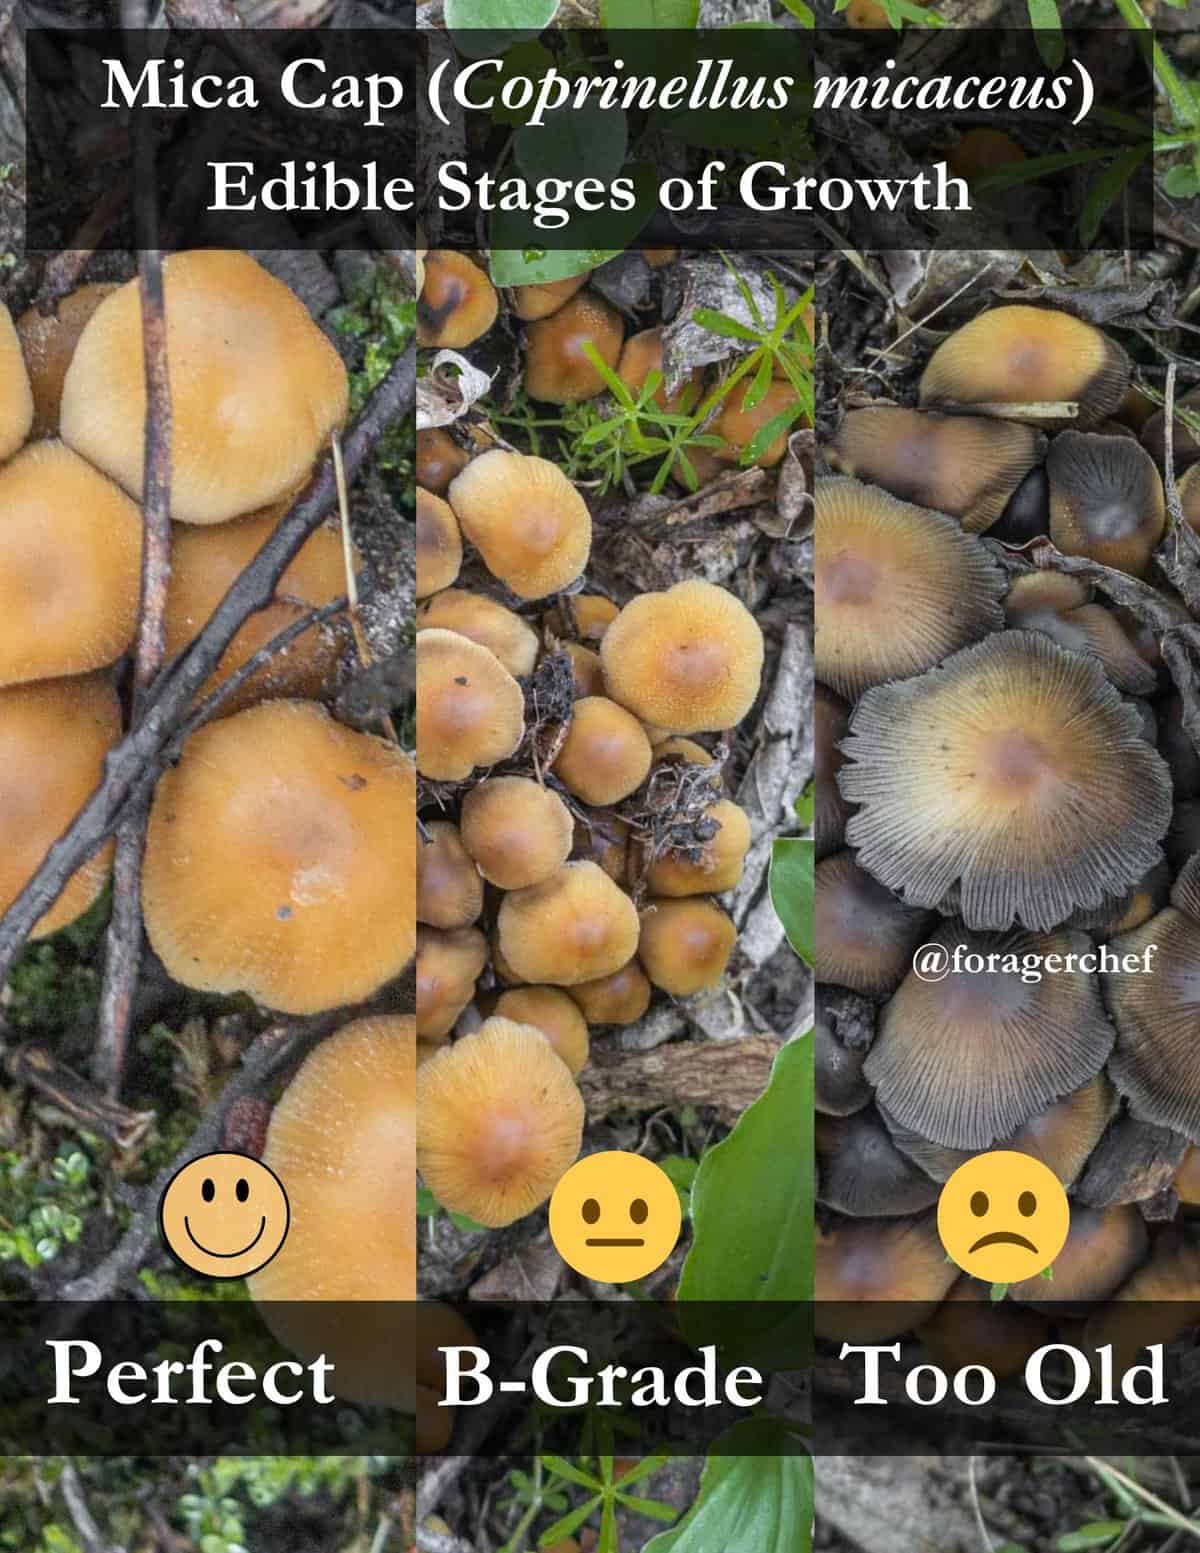 An infographic showing the different stages of growth of Coprinellus micaceus in three stages of edibility. 